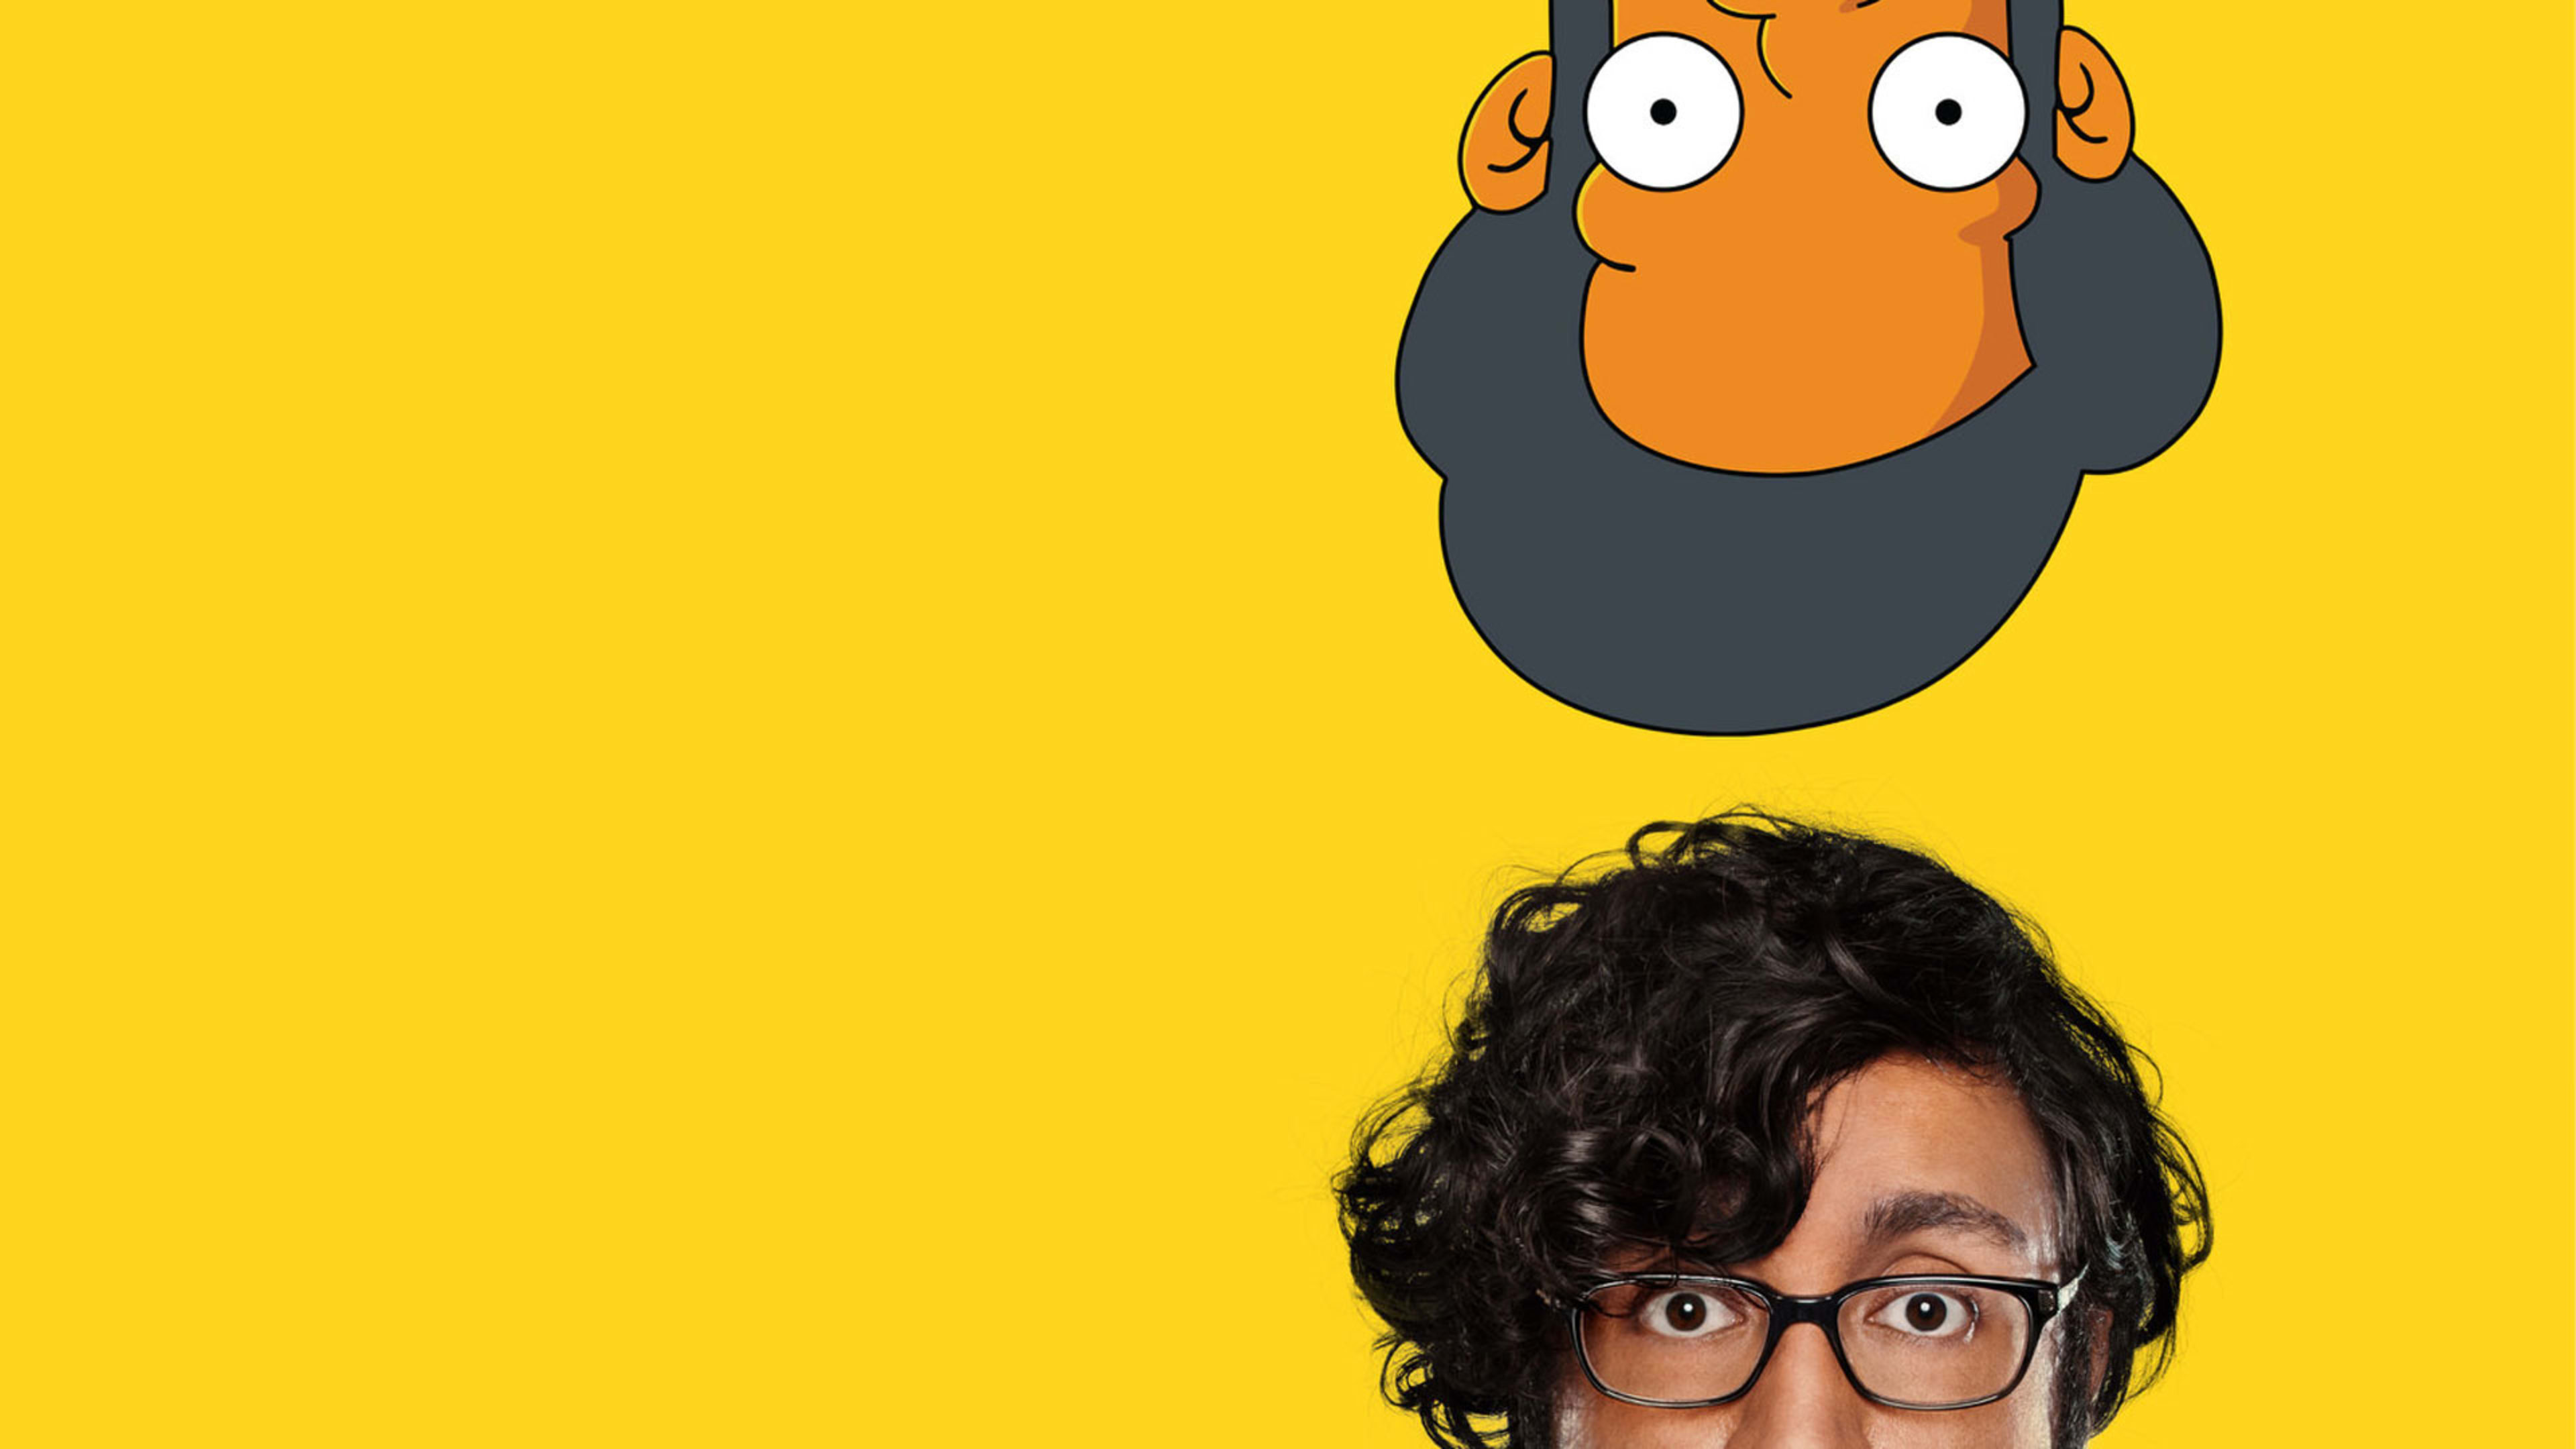 Hari Kondabolu On “The Problem With Apu” And Why Representation Matters